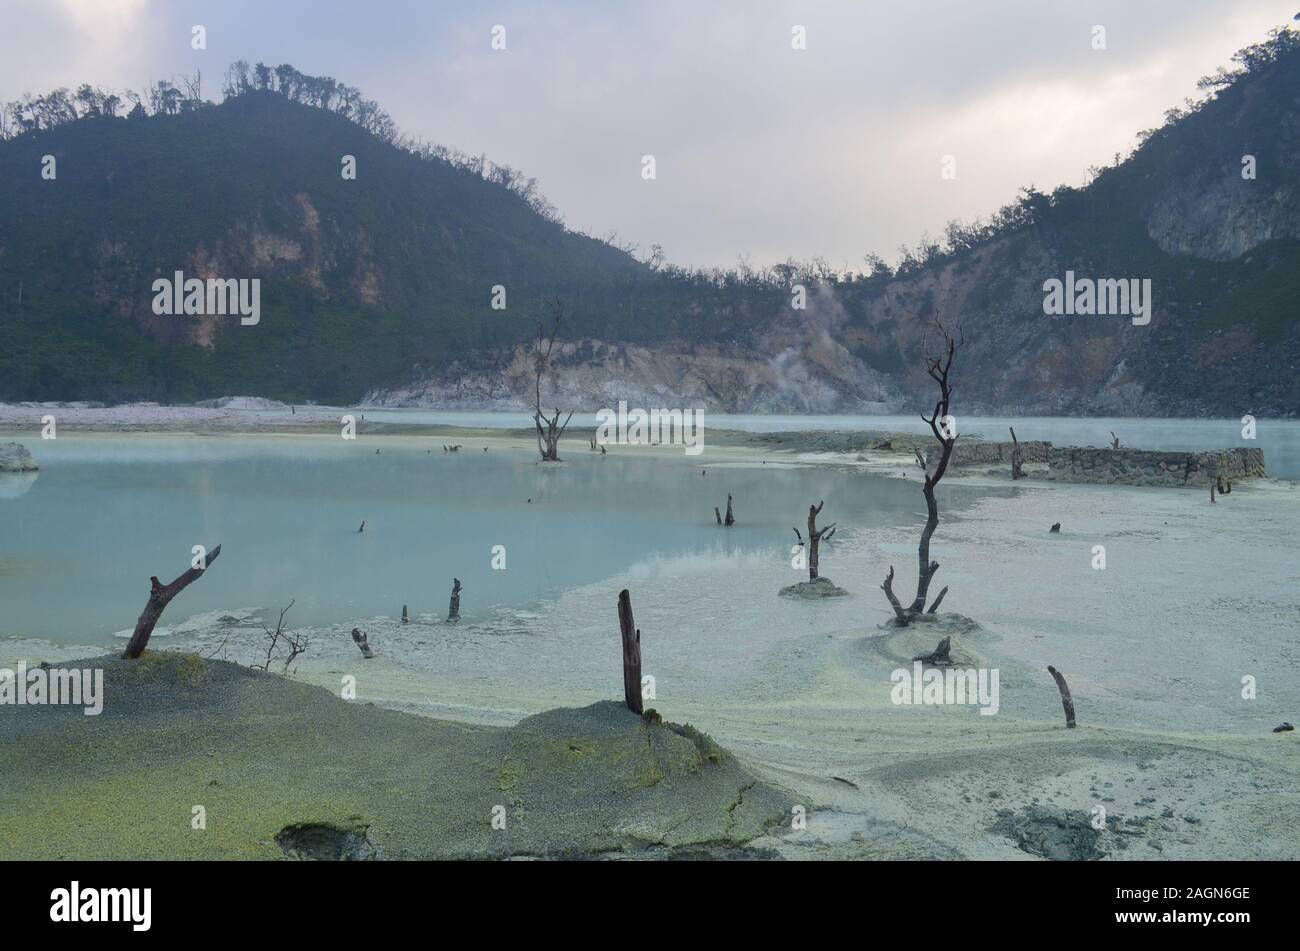 White Crater or known as 'Kawah Putih'. One of the tourist destination at Ciwidey, West Bandung, West Java, Indonesia Stock Photo